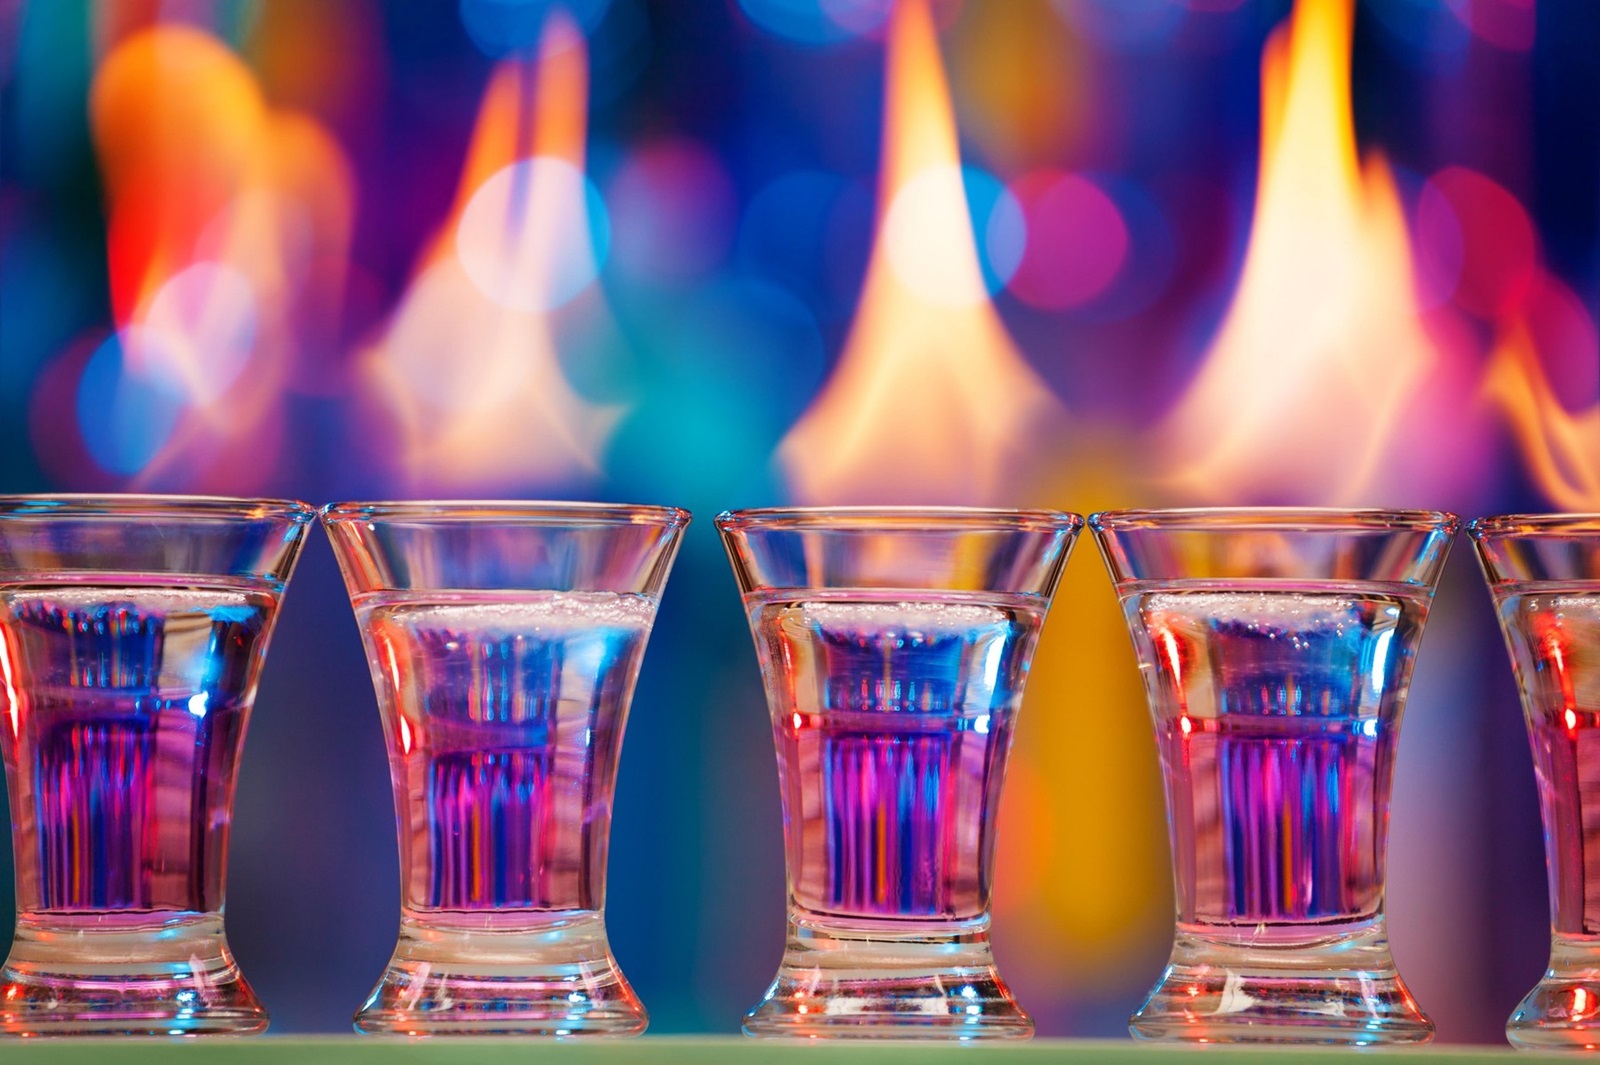 Close-up picture of hot shot glasses standing in a row on a bar counter,Image: 318252558, License: Royalty-free, Restrictions: , Model Release: no, Credit line: Sergey Novikov / Alamy / Alamy / Profimedia